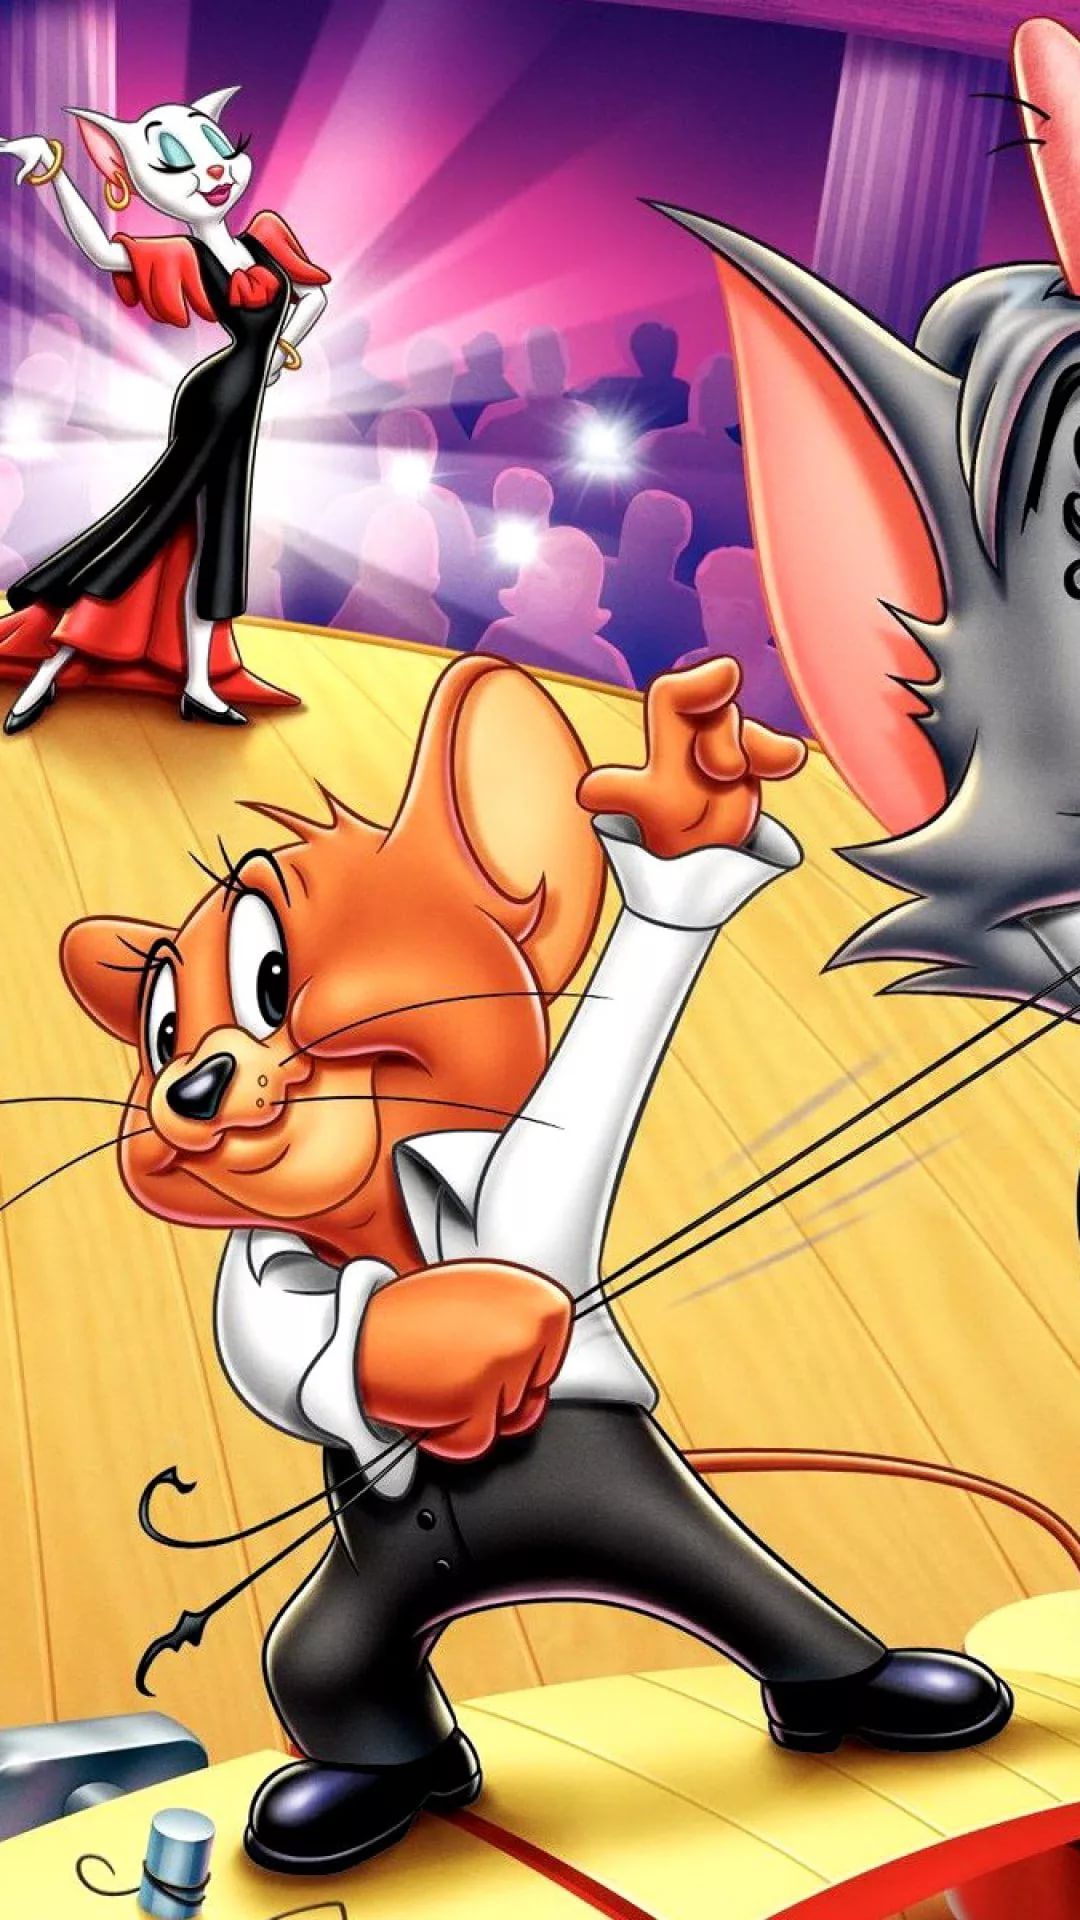 Wallpaper at Tucson: 1080p HD Tom And Jerry Wallpaper HD Download